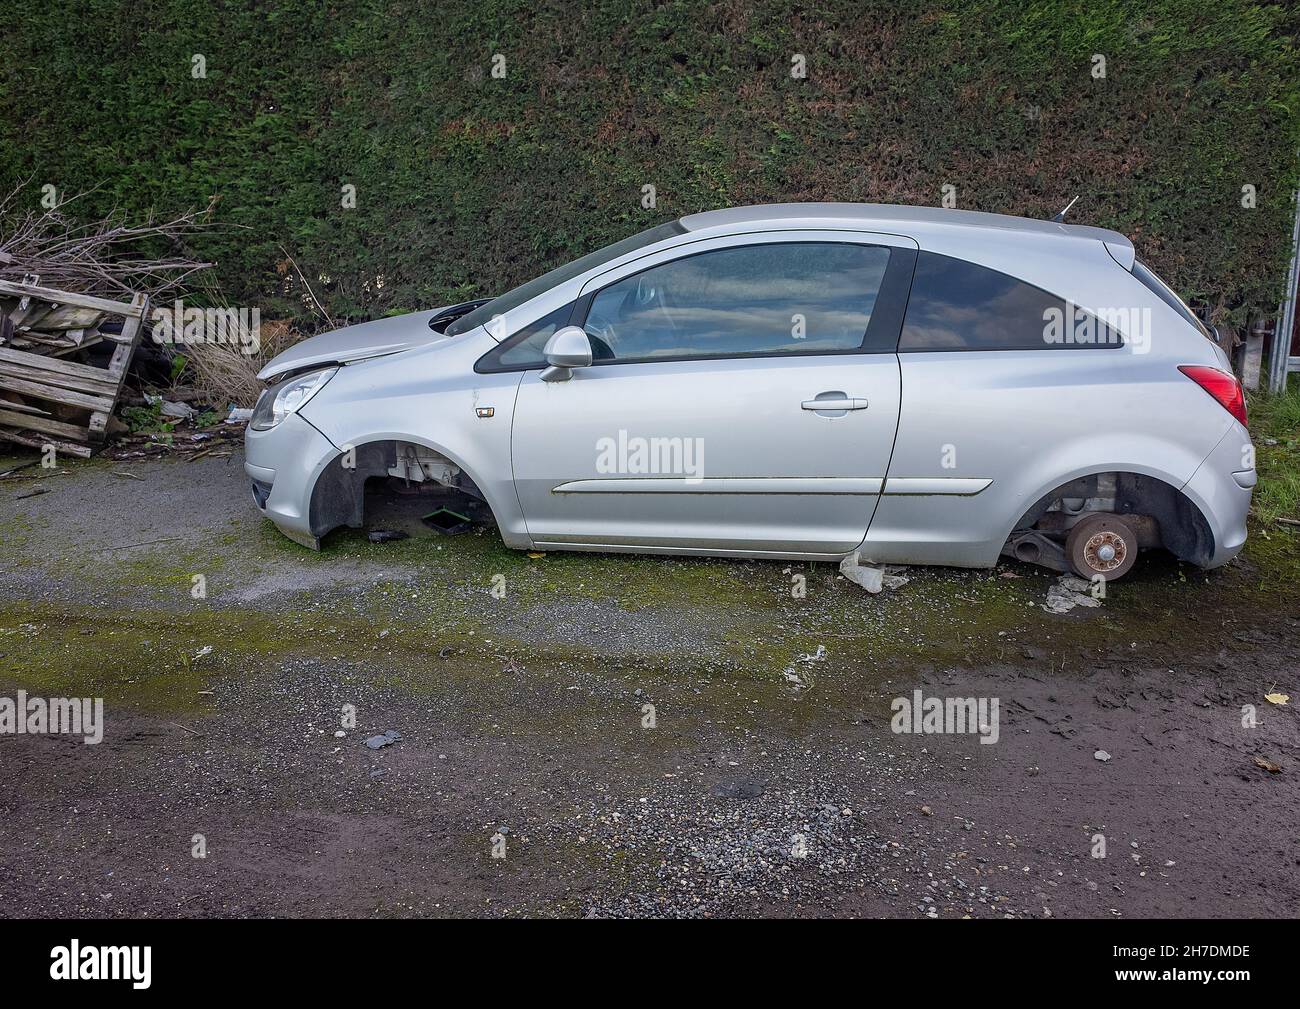 Abandoned small silver car with no wheels left of waste ground. Stock Photo